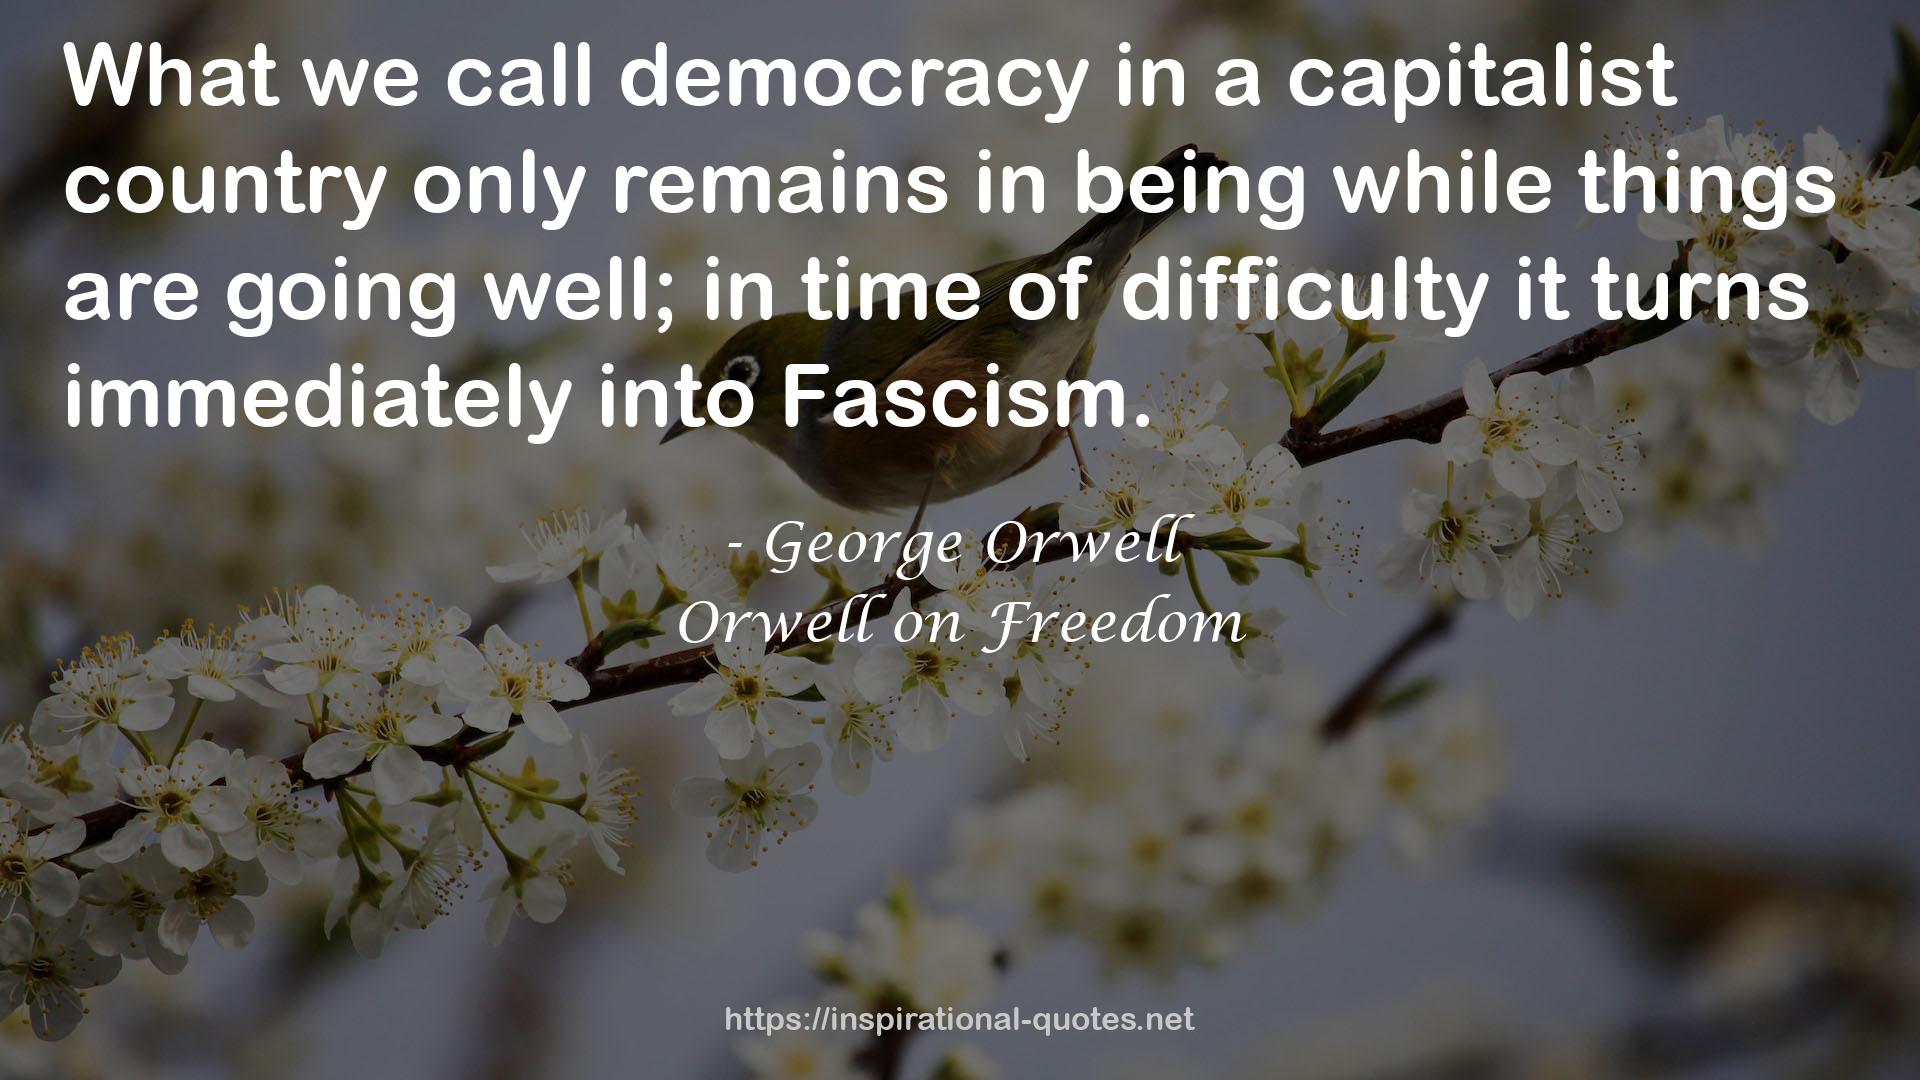 Orwell on Freedom QUOTES